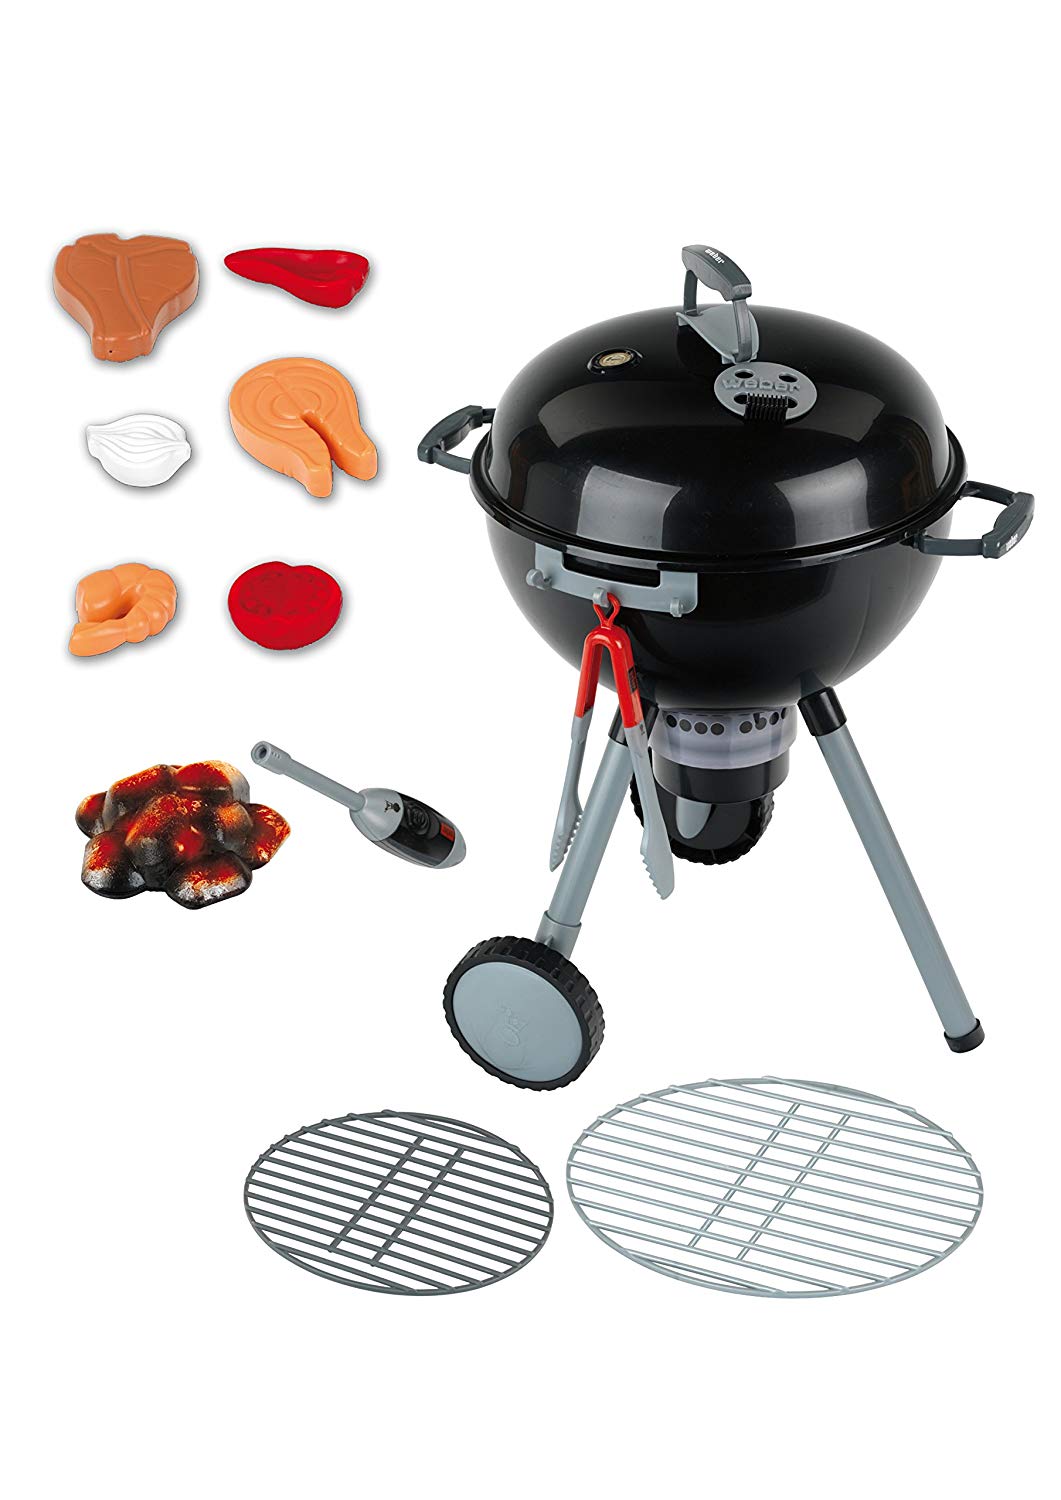 Kid BBQ Grill Pretend Play Toy Kitchen Barbecue Food Cooking Set Light & Smoke 